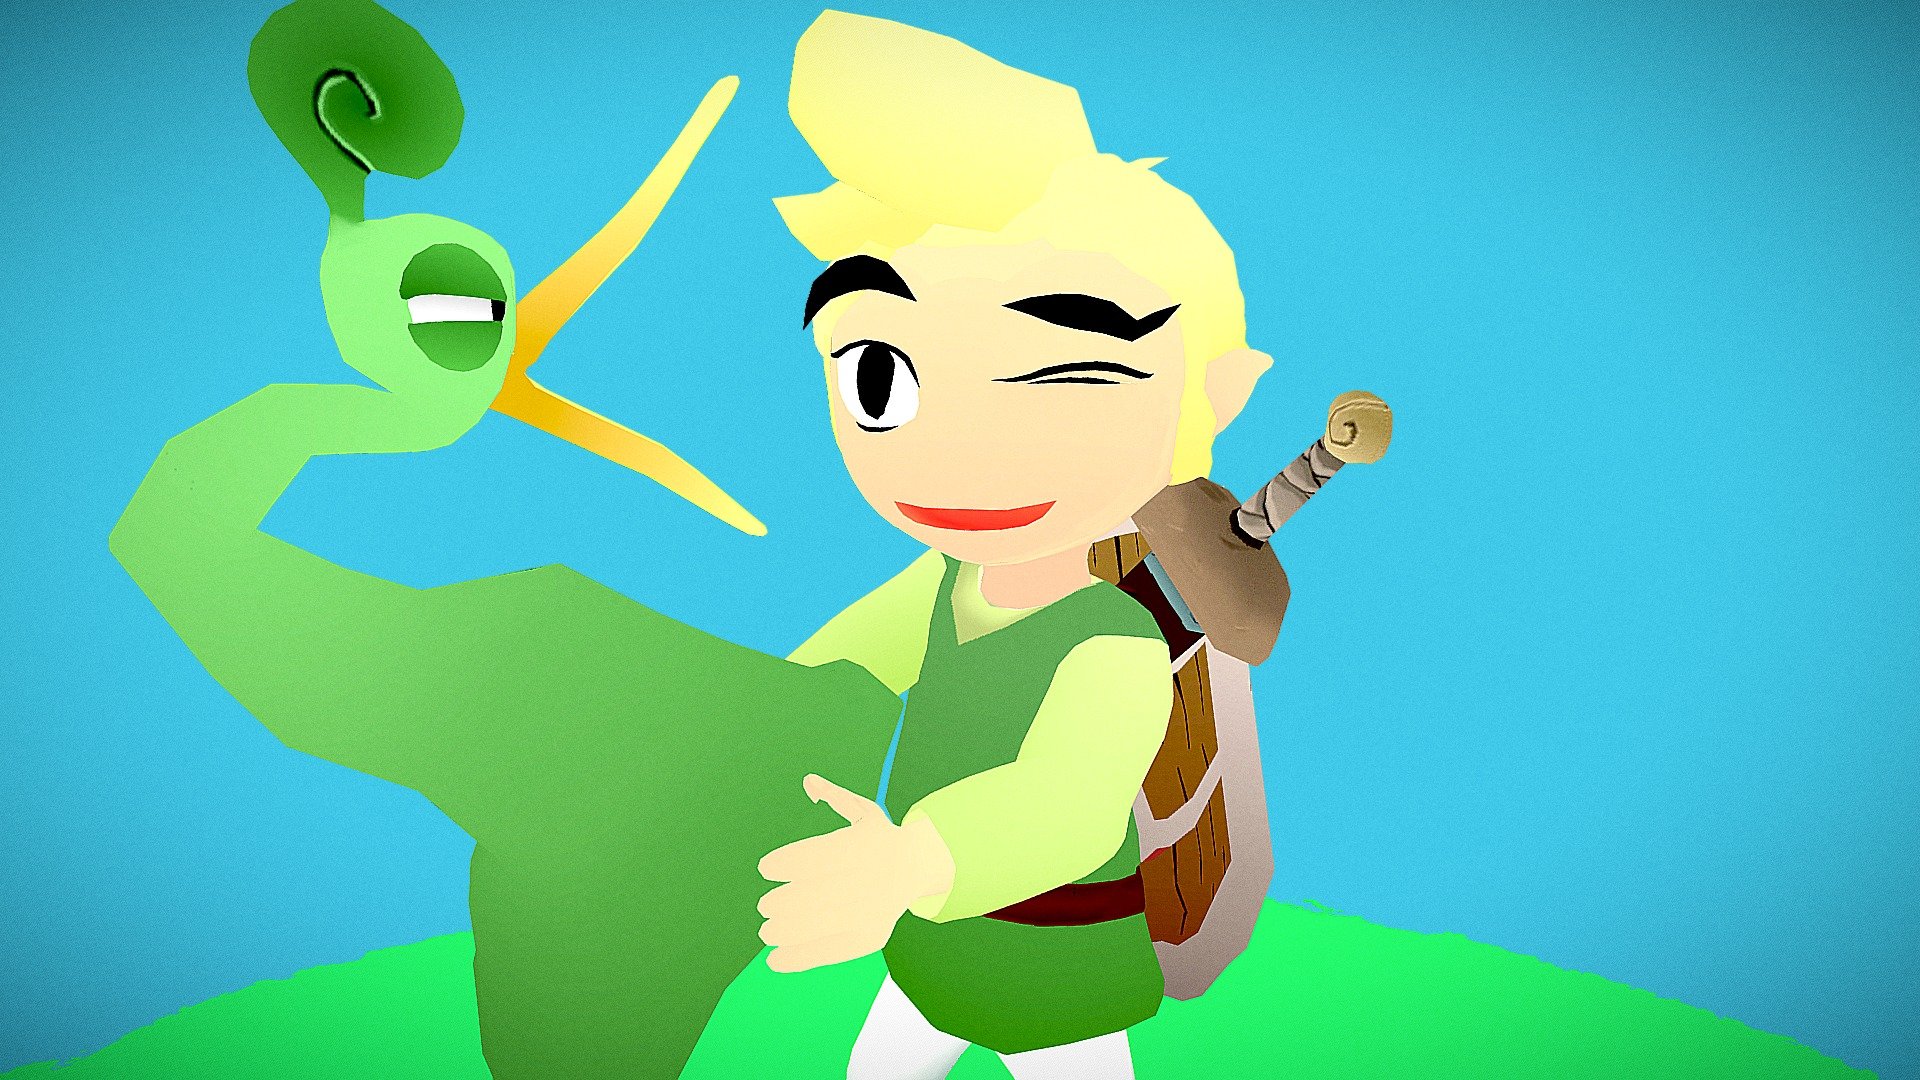 A model handpainted of the link from the legend of Zelda the Minish Cap, tring to emulate the stylized style of this game in a 3D world.

Fulled Rigged, and texturized, made all in Blender, posing in an iconic scene from the game arts.

includes the first Sword and Shield from the game, all texturized 3d model